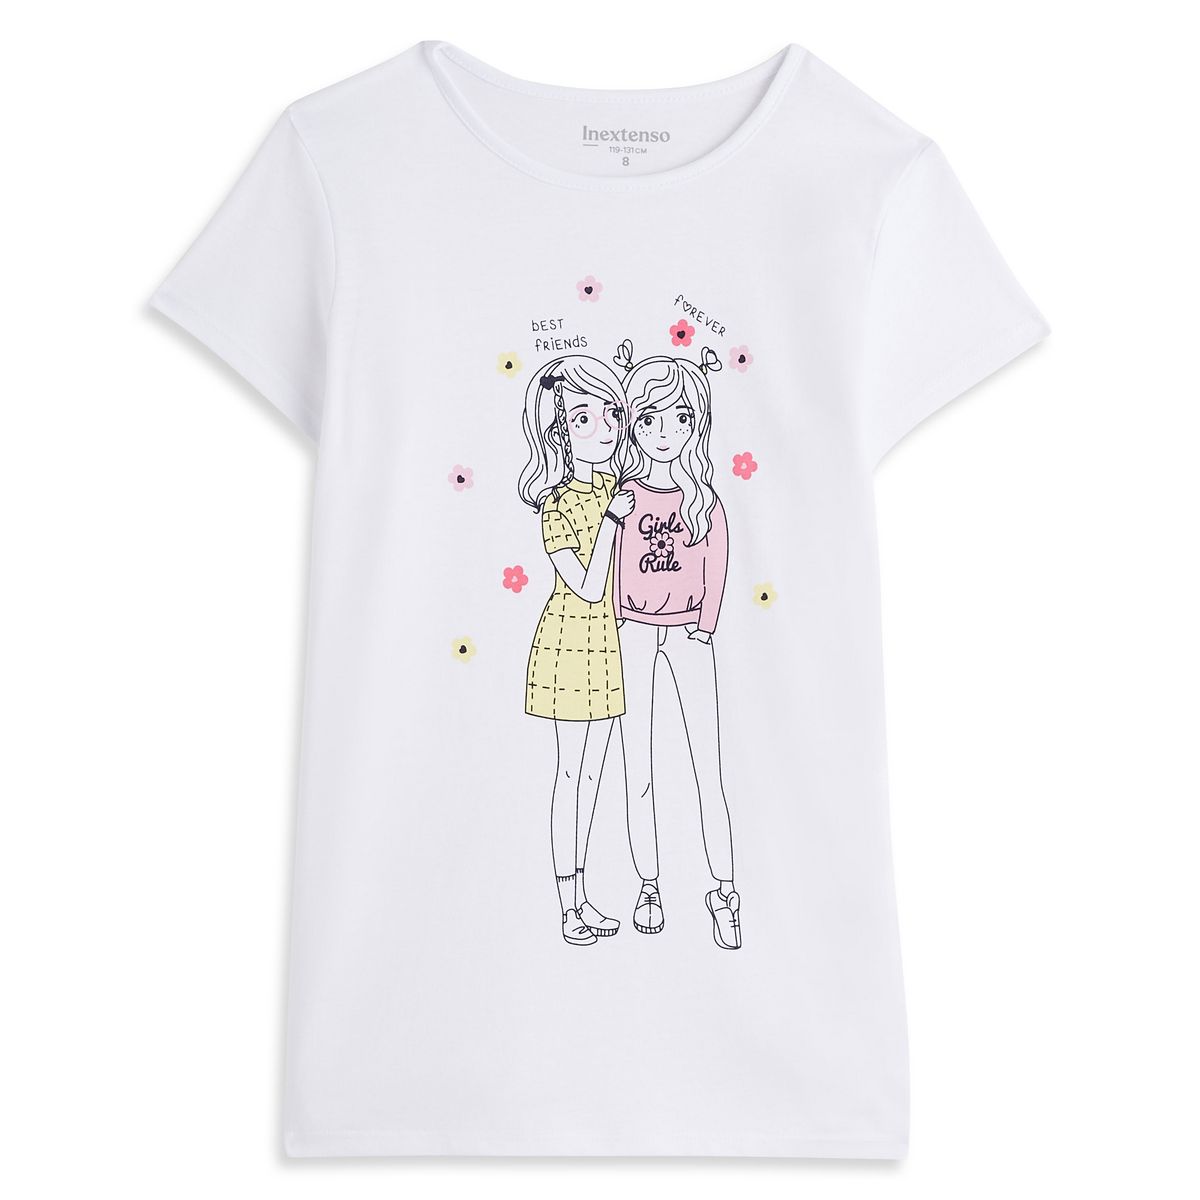 INEXTENSO T-shirt manches courtes blanc fille 